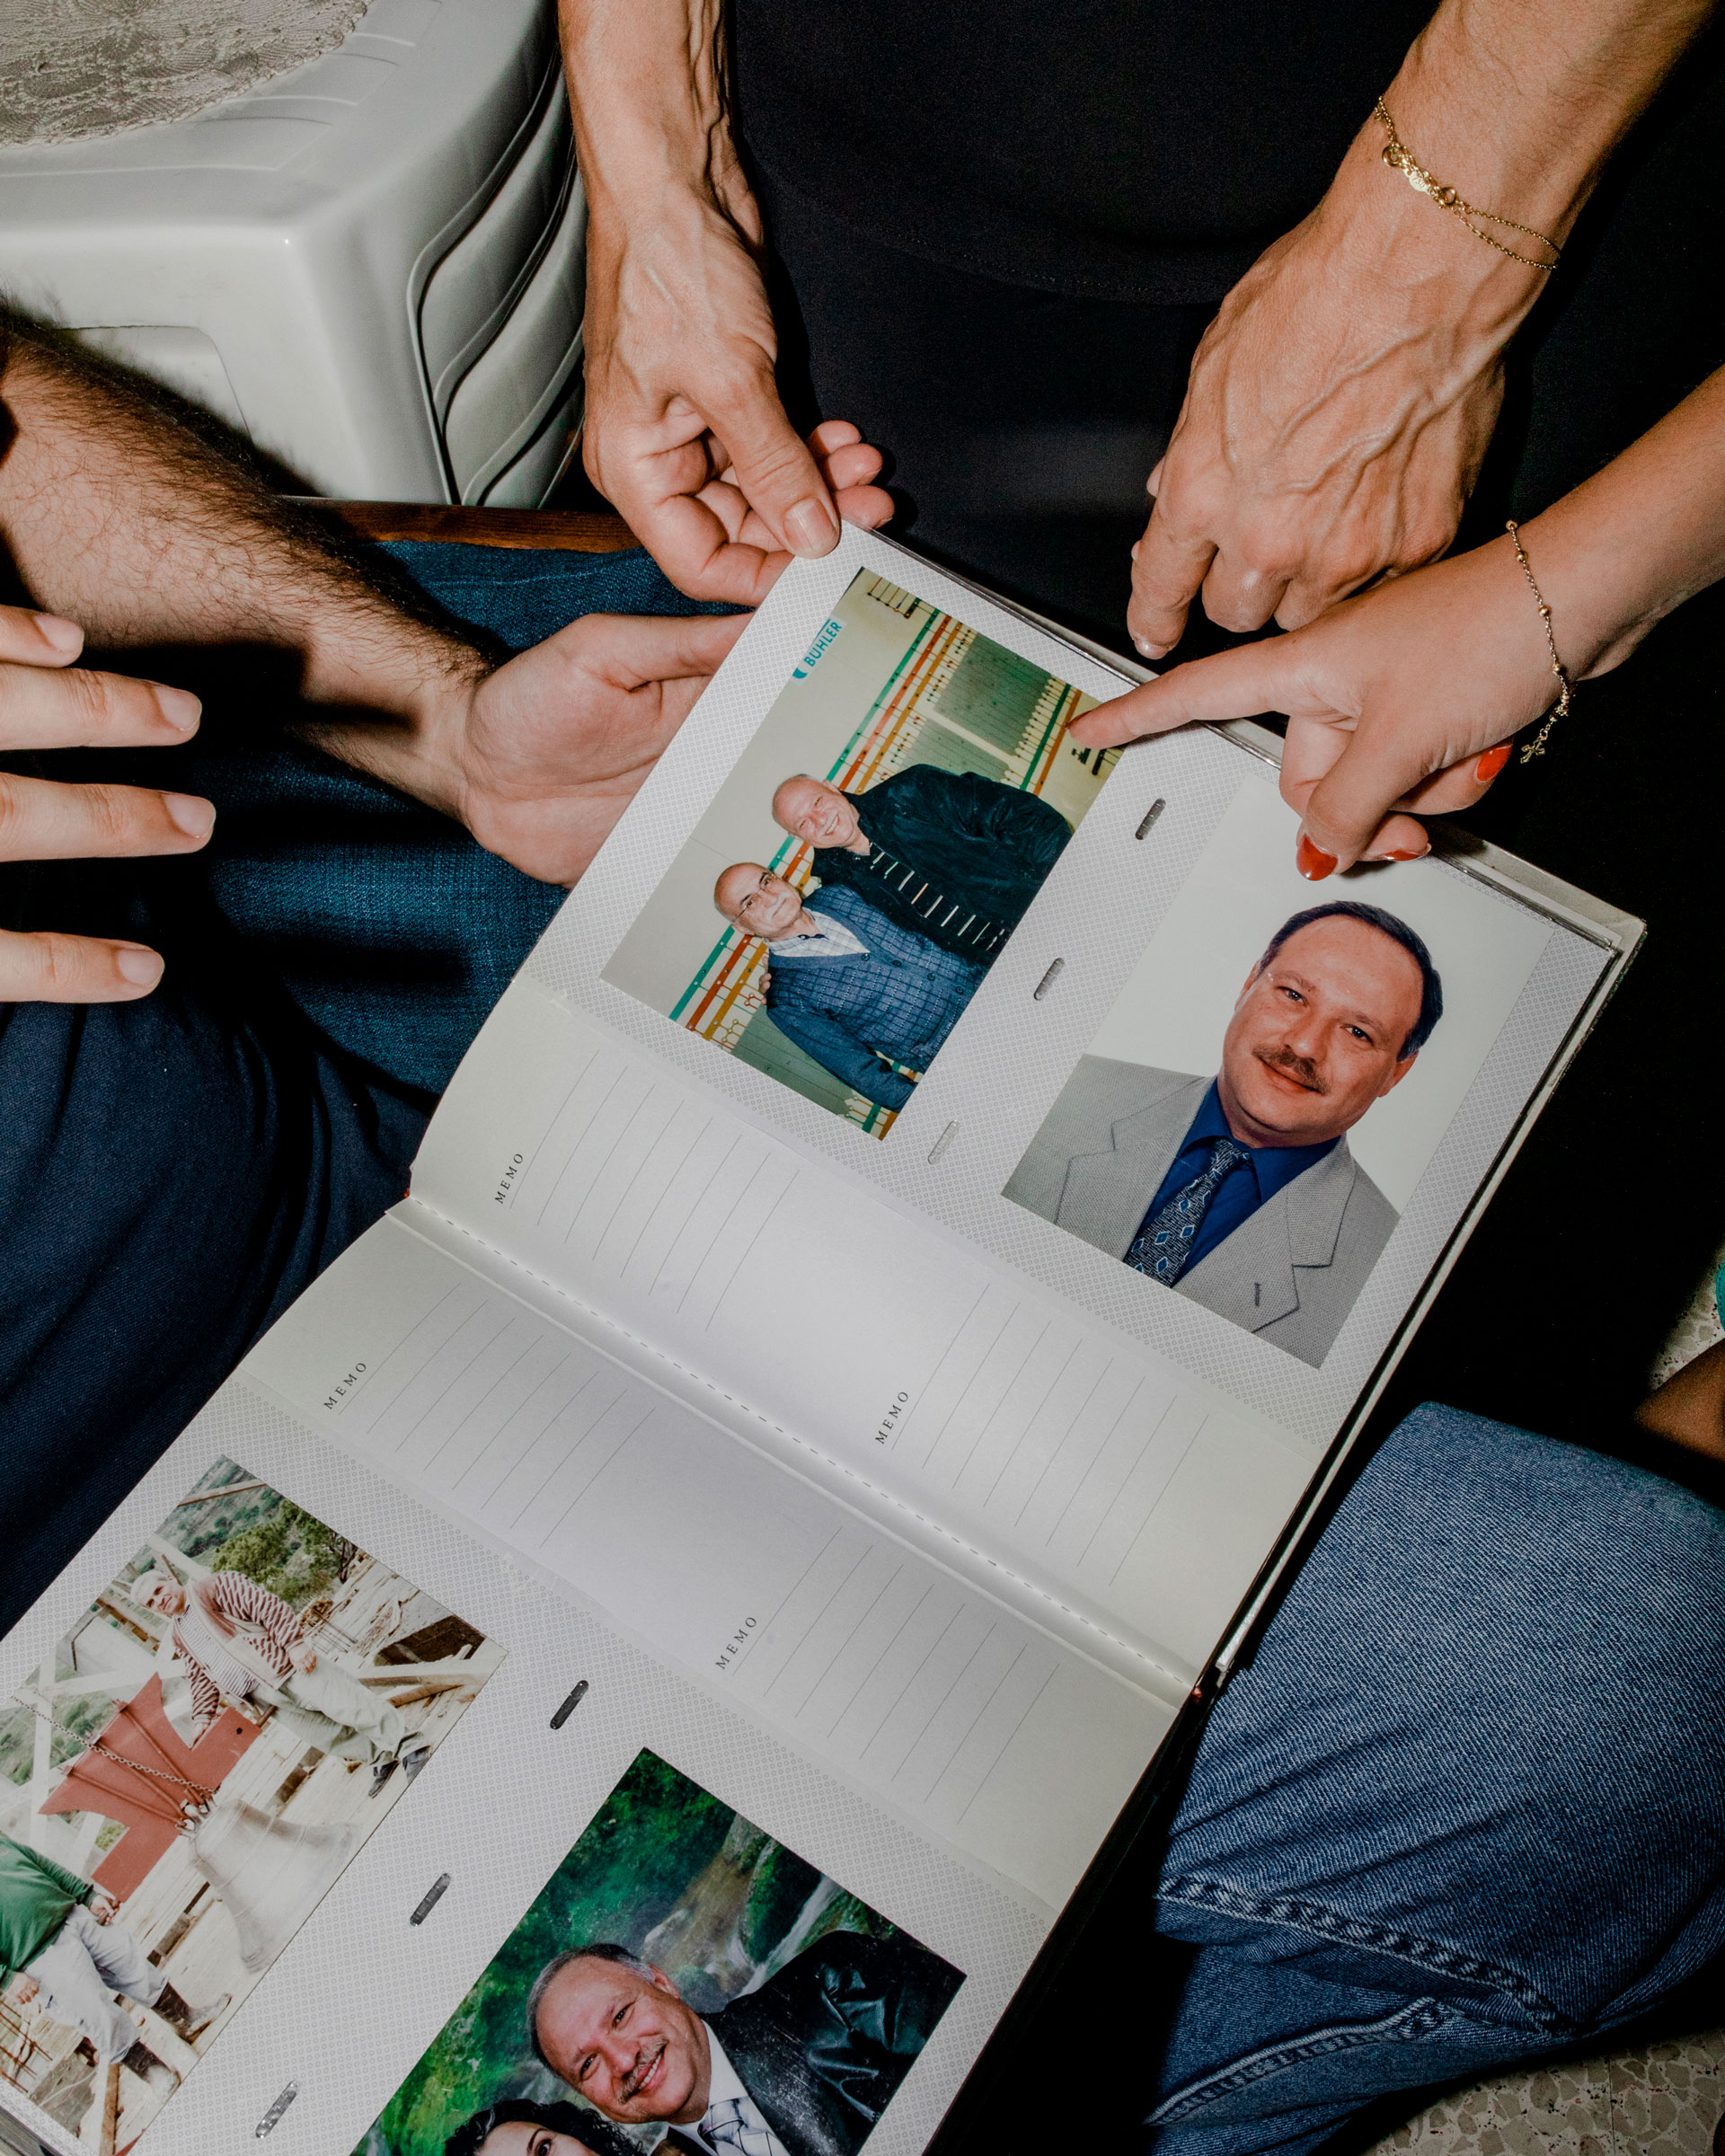 Elie, Ibtissam and Tatiana Hasrouty look at a family album with photographs of Ghassan working in the silos at Beirut’s port, where he worked and passed away.